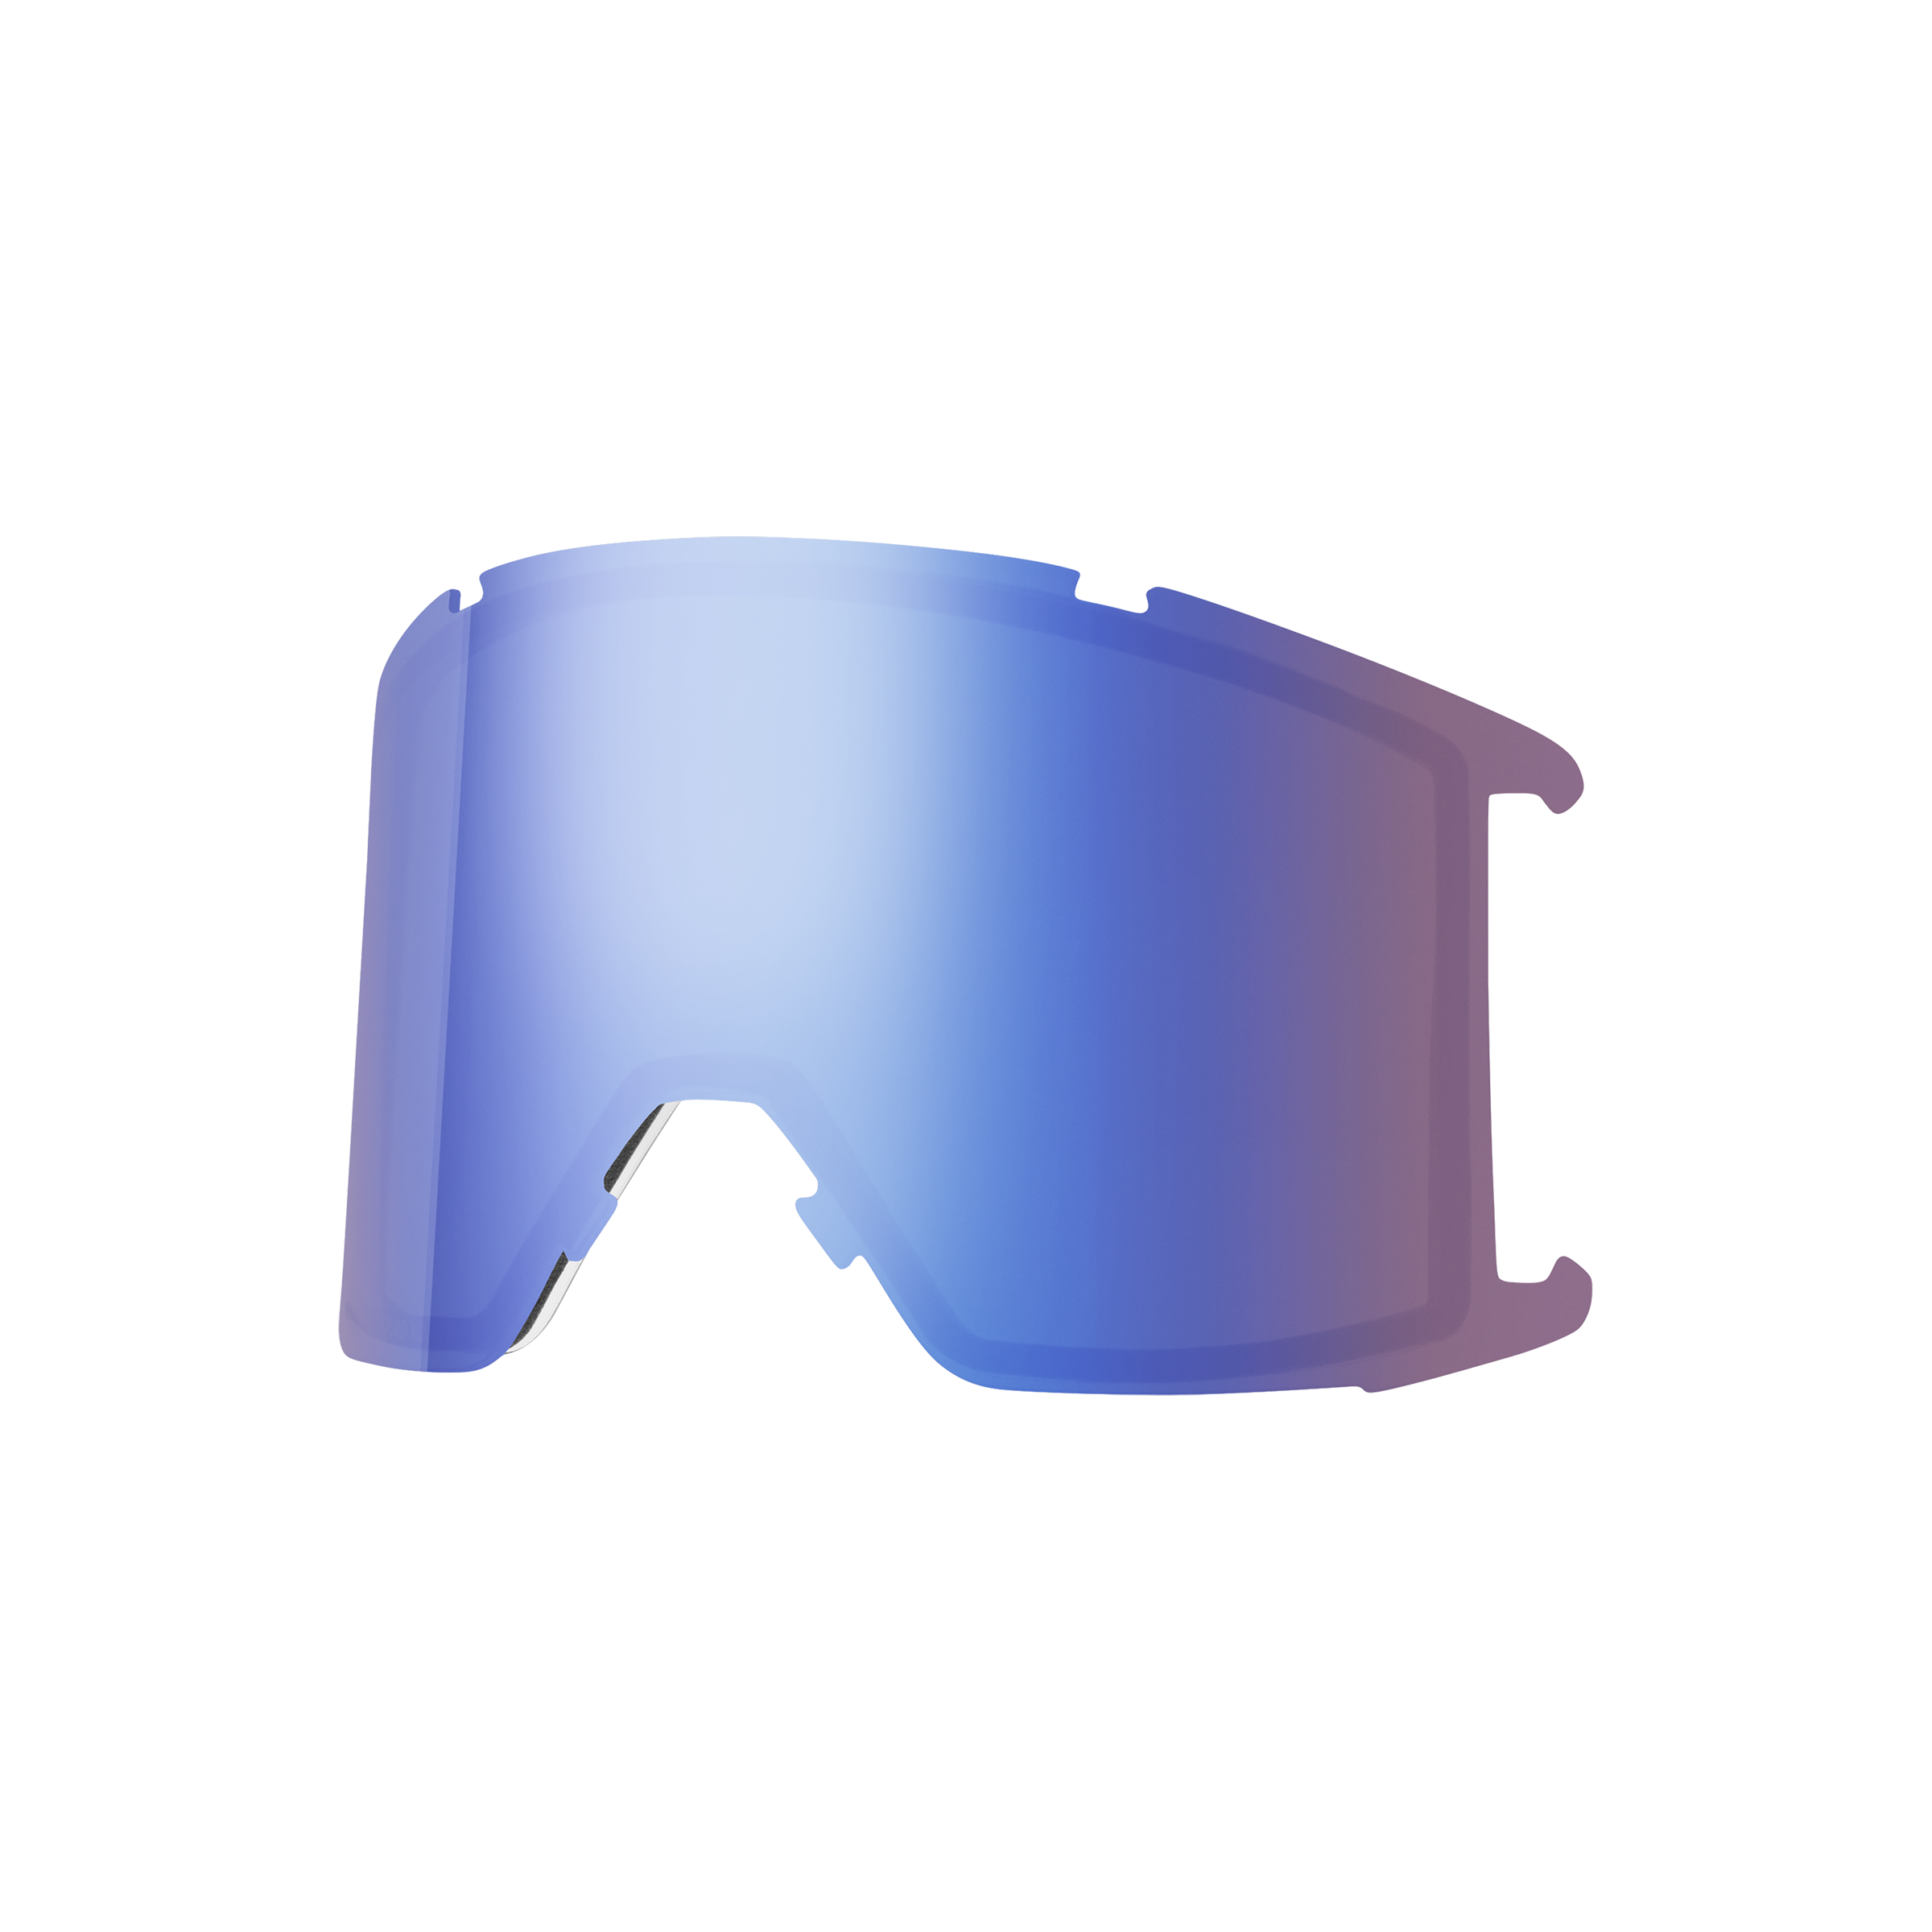 Smith Squad XL Snow Goggle Replacement Lens 